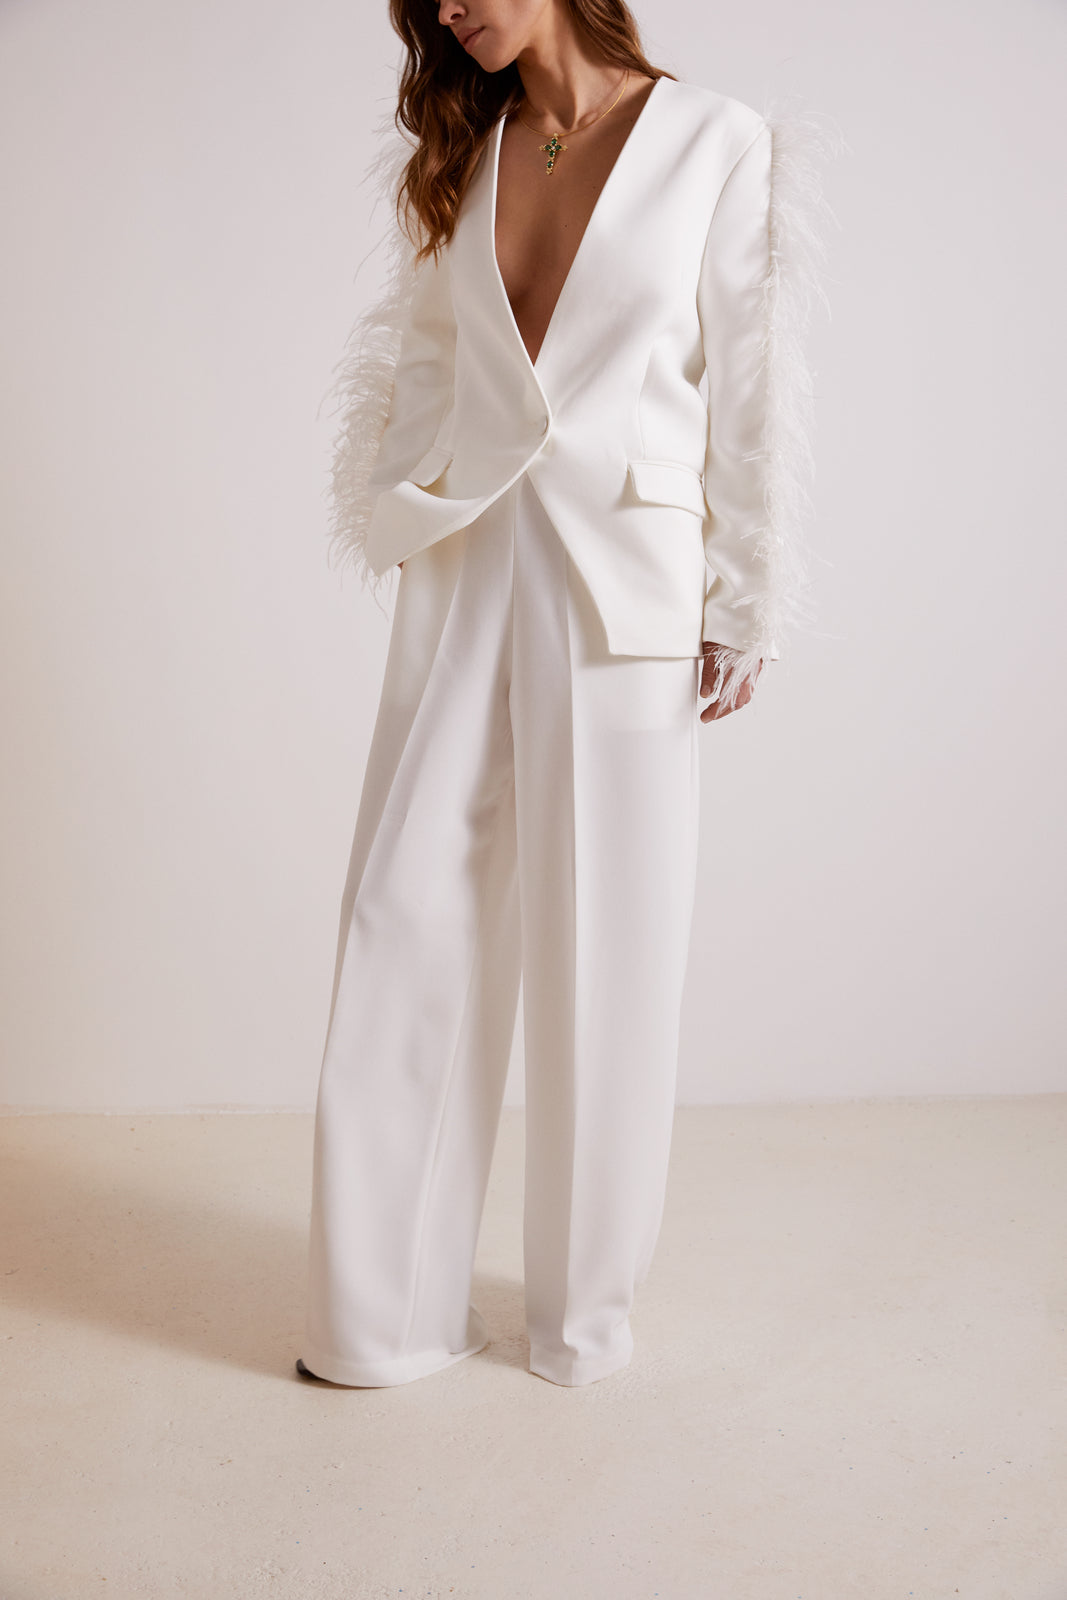 WHITE BLAZER WITH FEATHERS ON THE SLEEVES